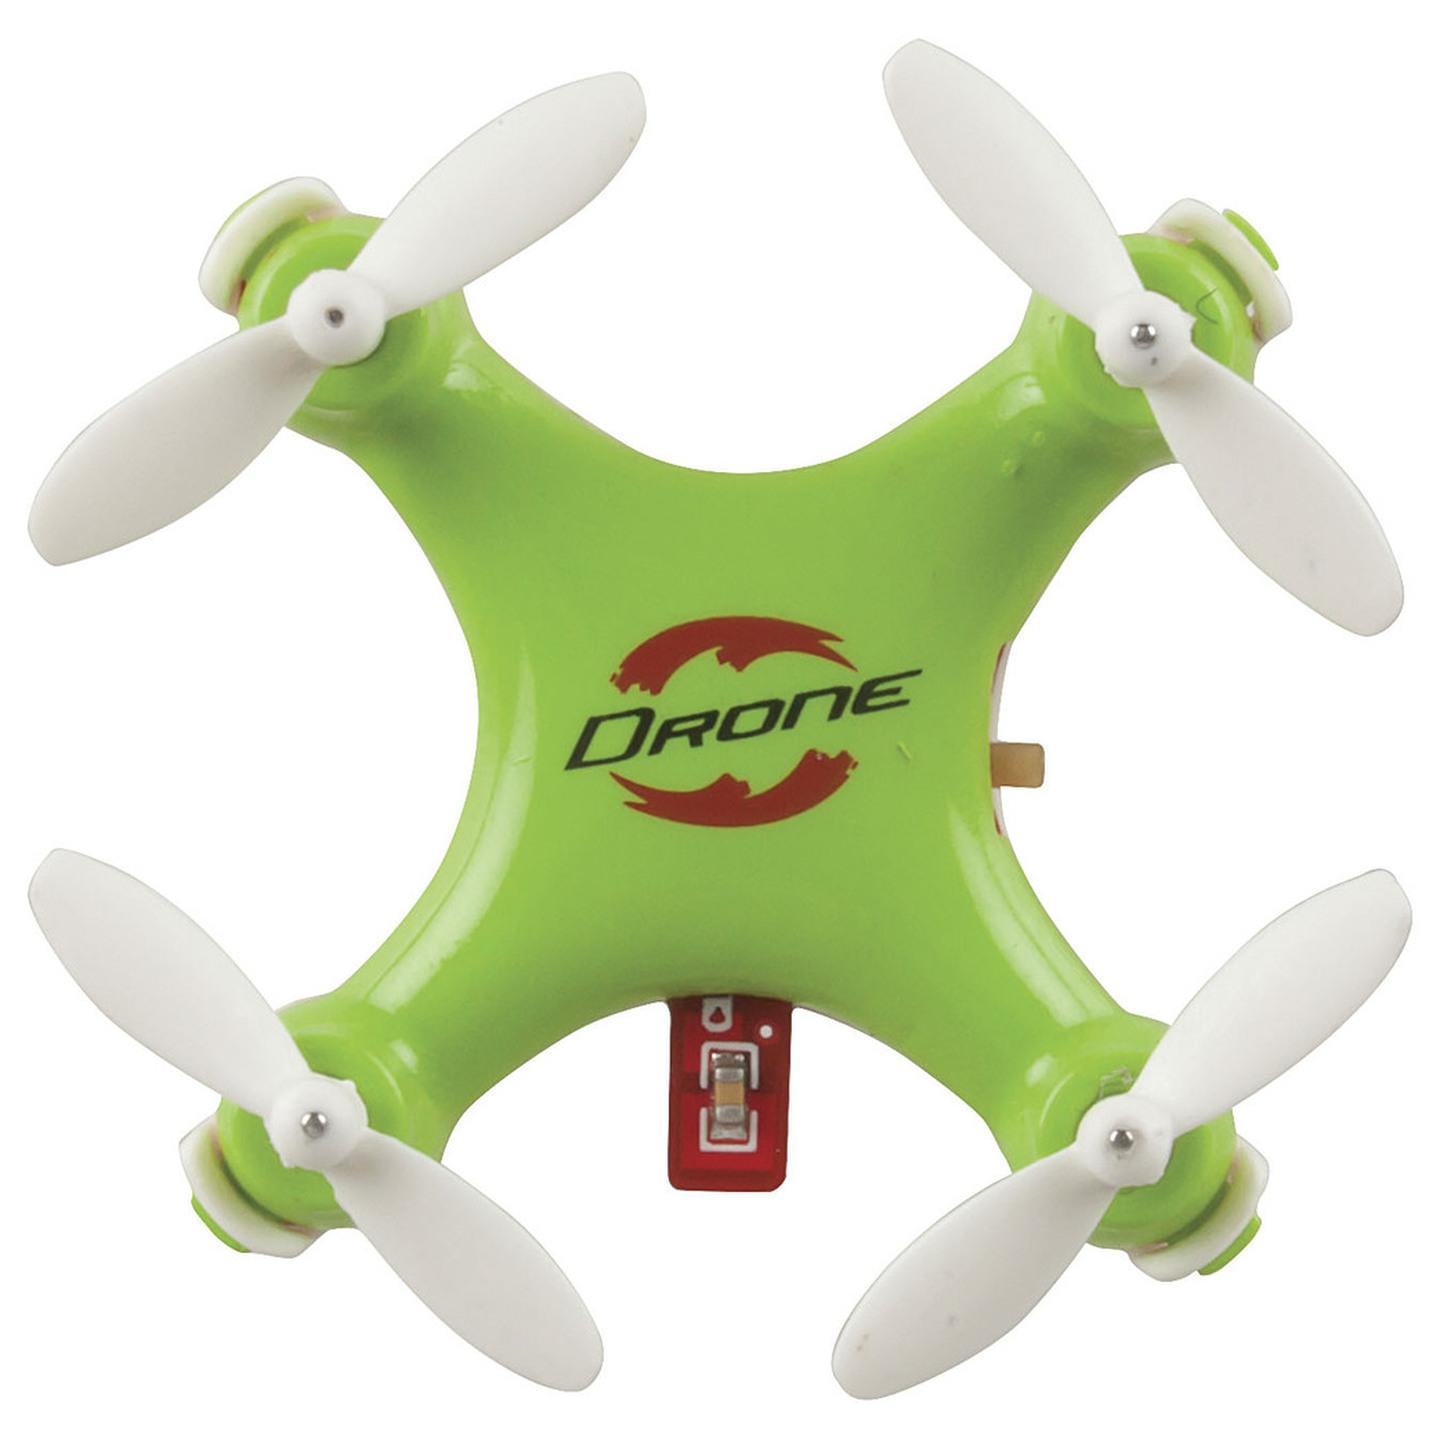 Micro Flipping Quadcopter 2.4GHz